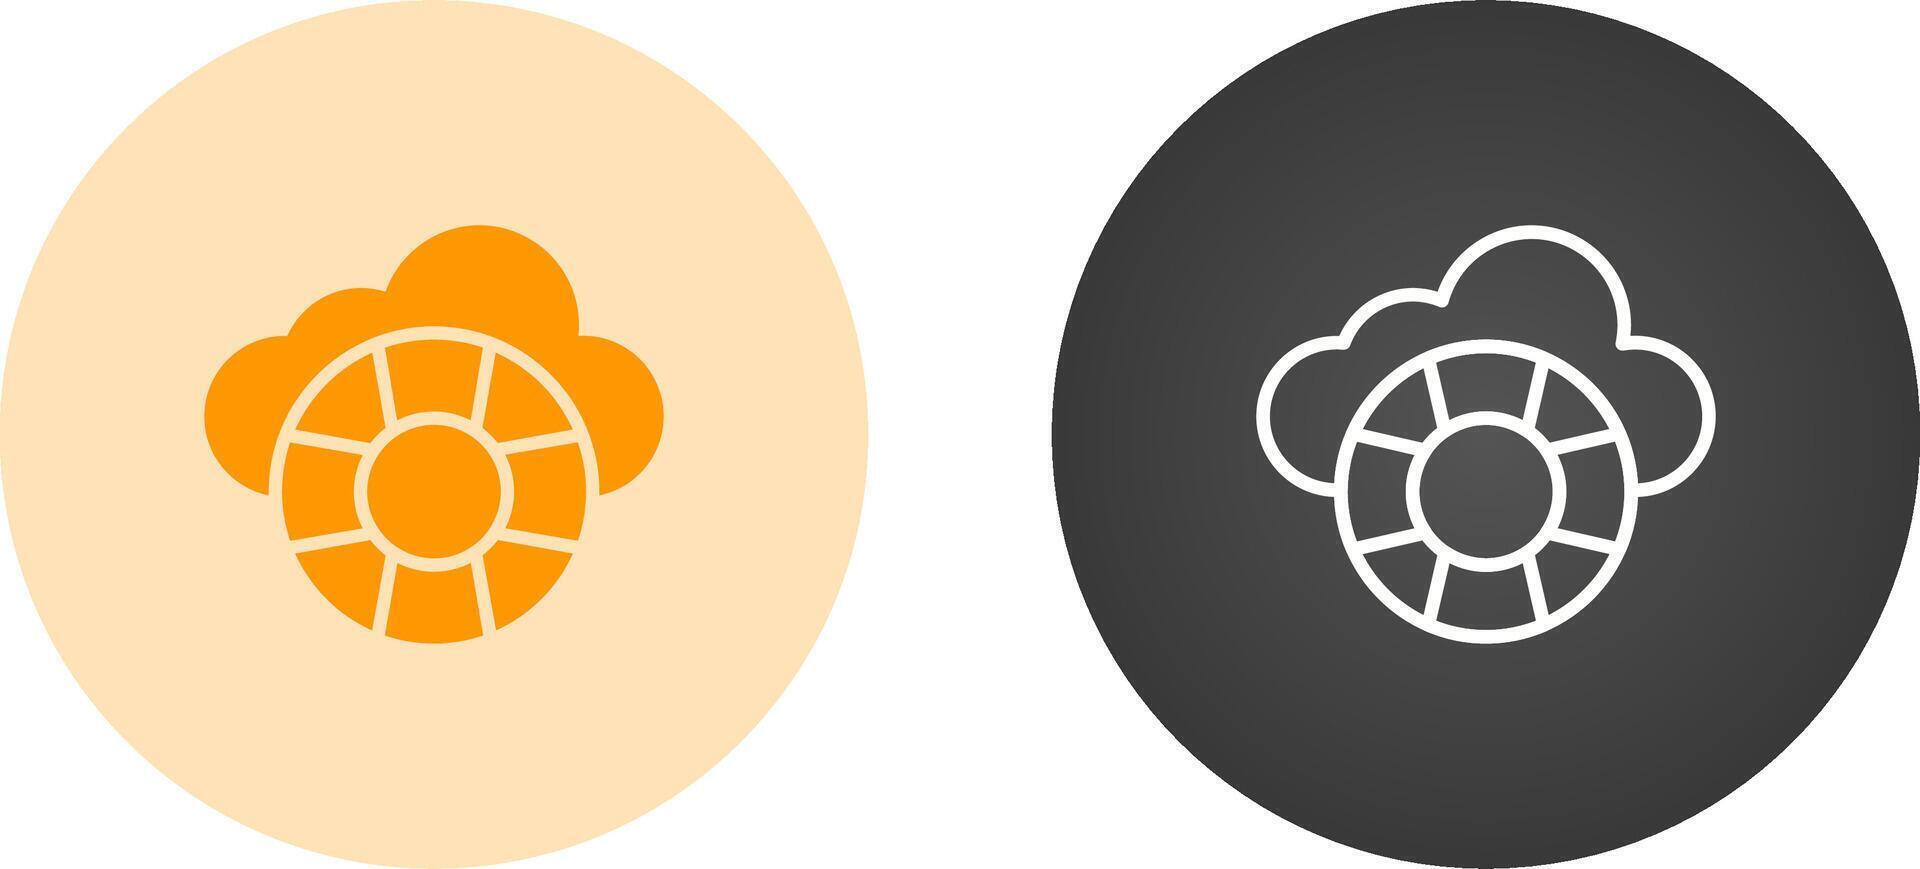 Disaster Recovery Vector Icon